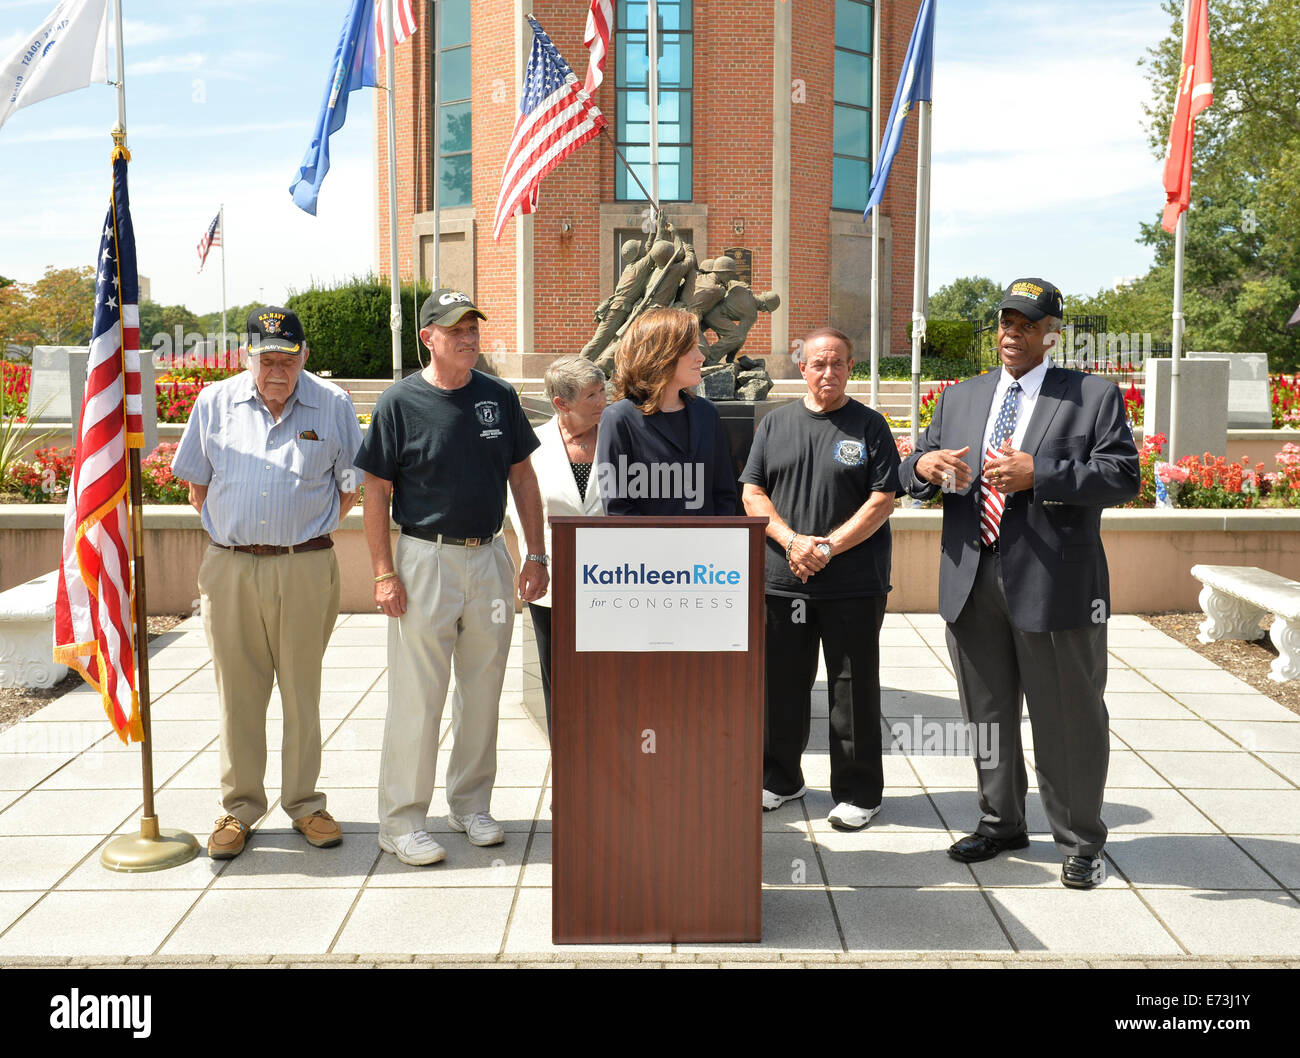 East Meadow, New York, USA. 3rd September, 2014.  KATHLEEN RICE, at podium, Democratic congressional candidate (NY-04), announces formation of her campaign's Veterans Advisory Committee, at Veterans Memorial at Eisenhower Park. Congresswoman CAROLYN MCCARTHY (in white jacket) and 4 committee members joined Rice at press conference: speaking is JEREMIAH E. BRYANT, of Rockville Centre, U.S. Army, Vietnam War Veteran; & veterans STEVE BONOM, of Massapequa, U.S. Navy, Vietnam War; PAT YNGSTROM, Merrick, US Army Vietnam War, & PAUL ZYDOR, Merrick, US Navy, Korean War.  Credit:  Ann E Parry/Alamy Li Stock Photo